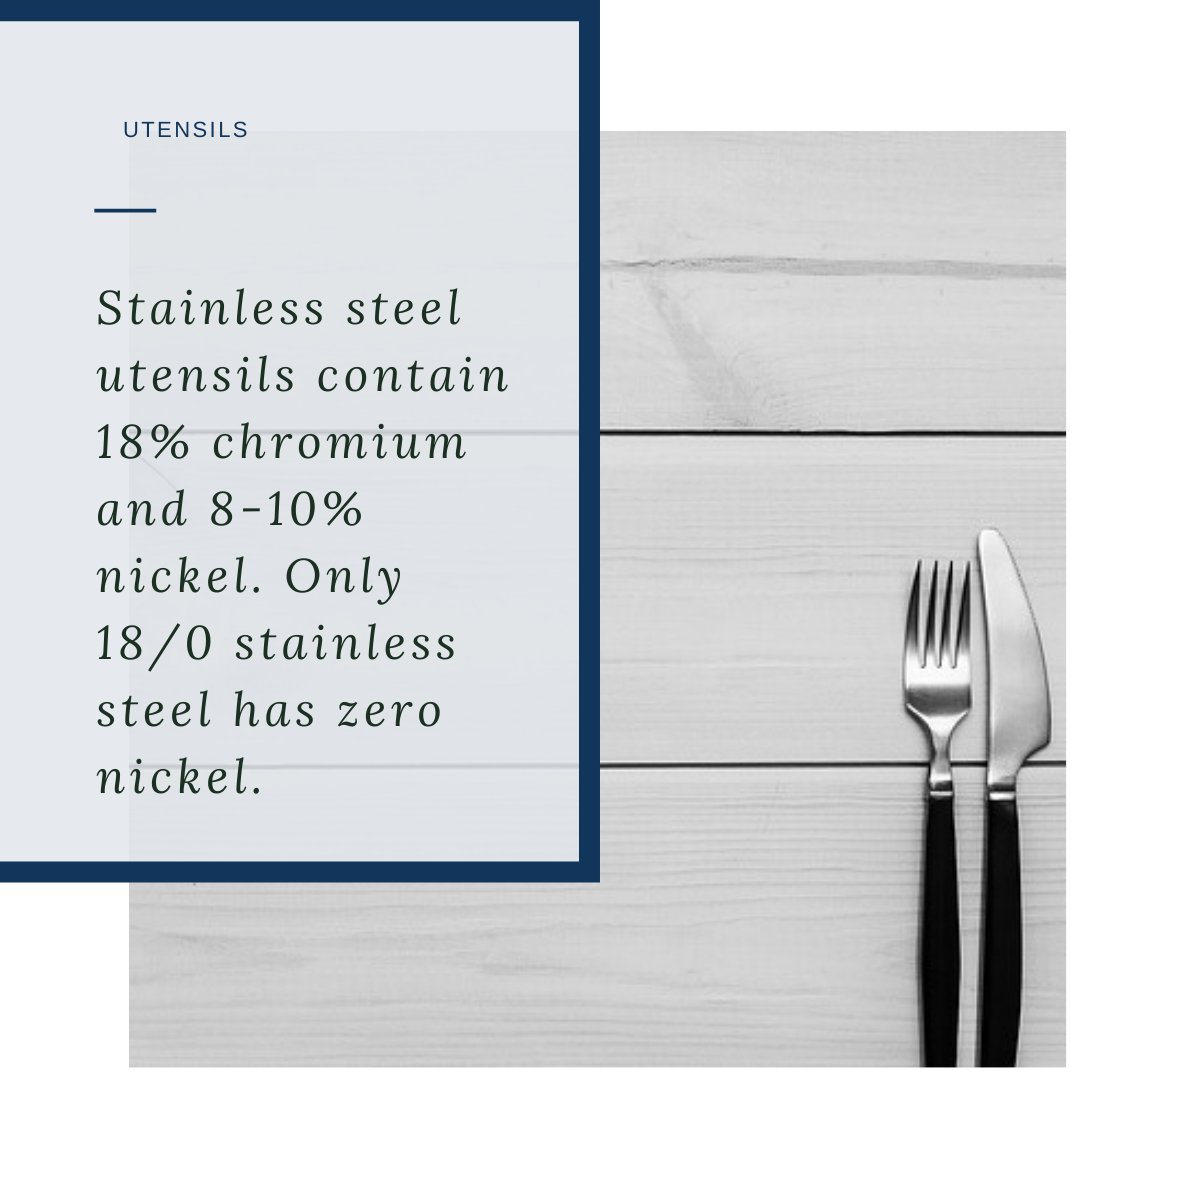 Stainless steel is the most used metal in the U.S. and it is usually mixed with nickel. Looking for 18/0 stainless steel utensils are the best bet to avoid nickel. 

Beware of any surgical and other stainless steel...
#nickelallergy #nickel #nichel #nichelifestyle #allergianichel